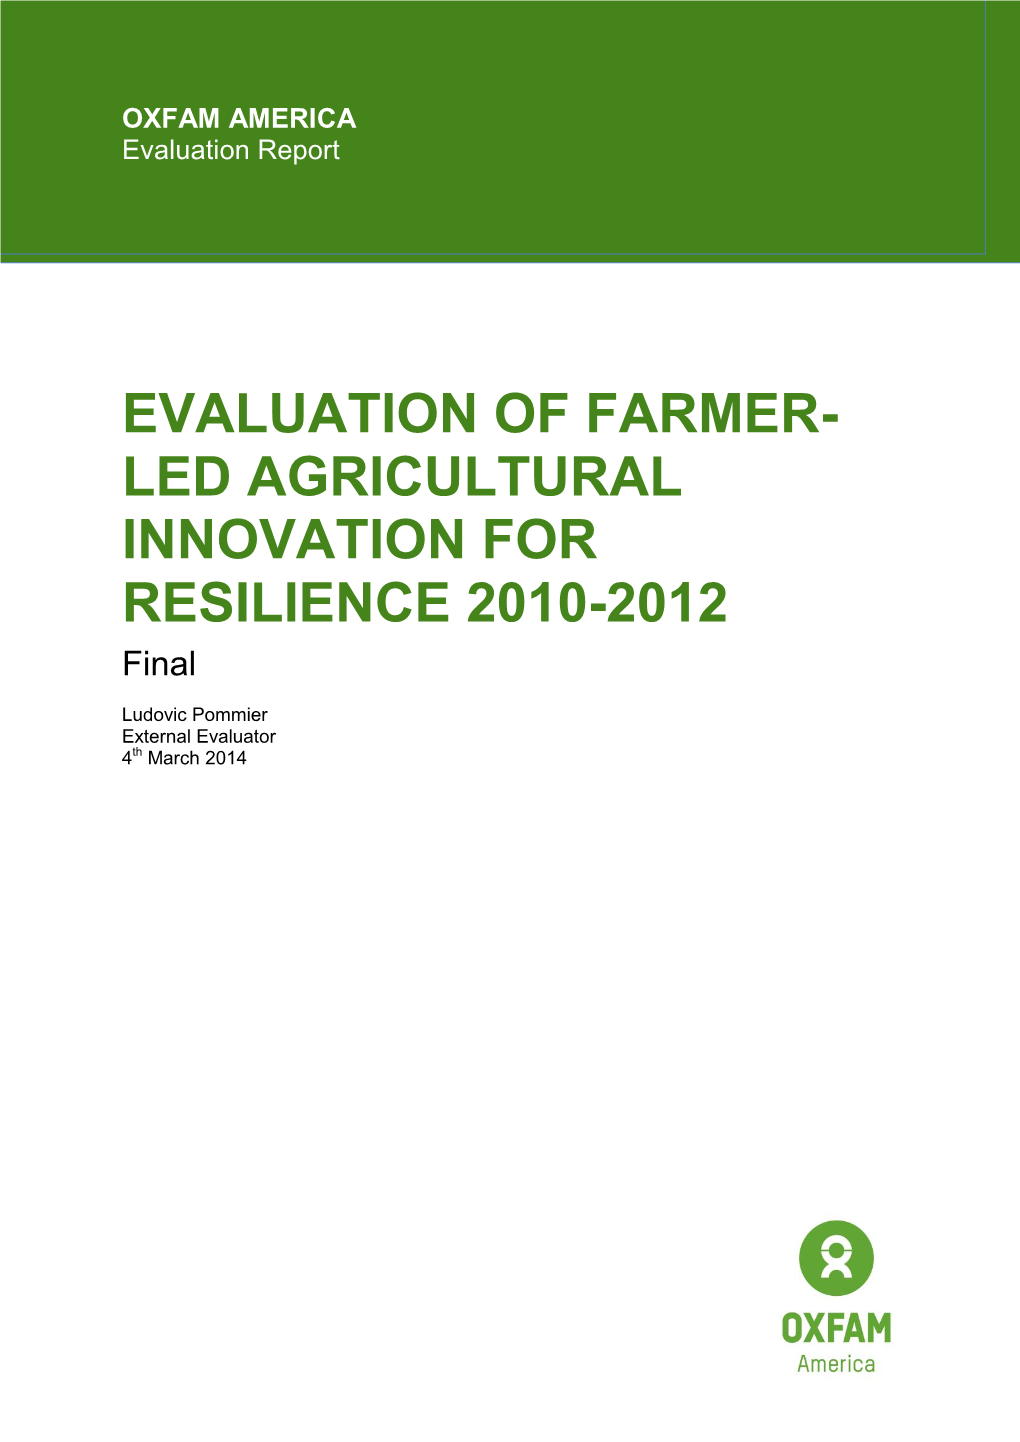 EVALUATION of FARMER- LED AGRICULTURAL INNOVATION for RESILIENCE 2010-2012 Final